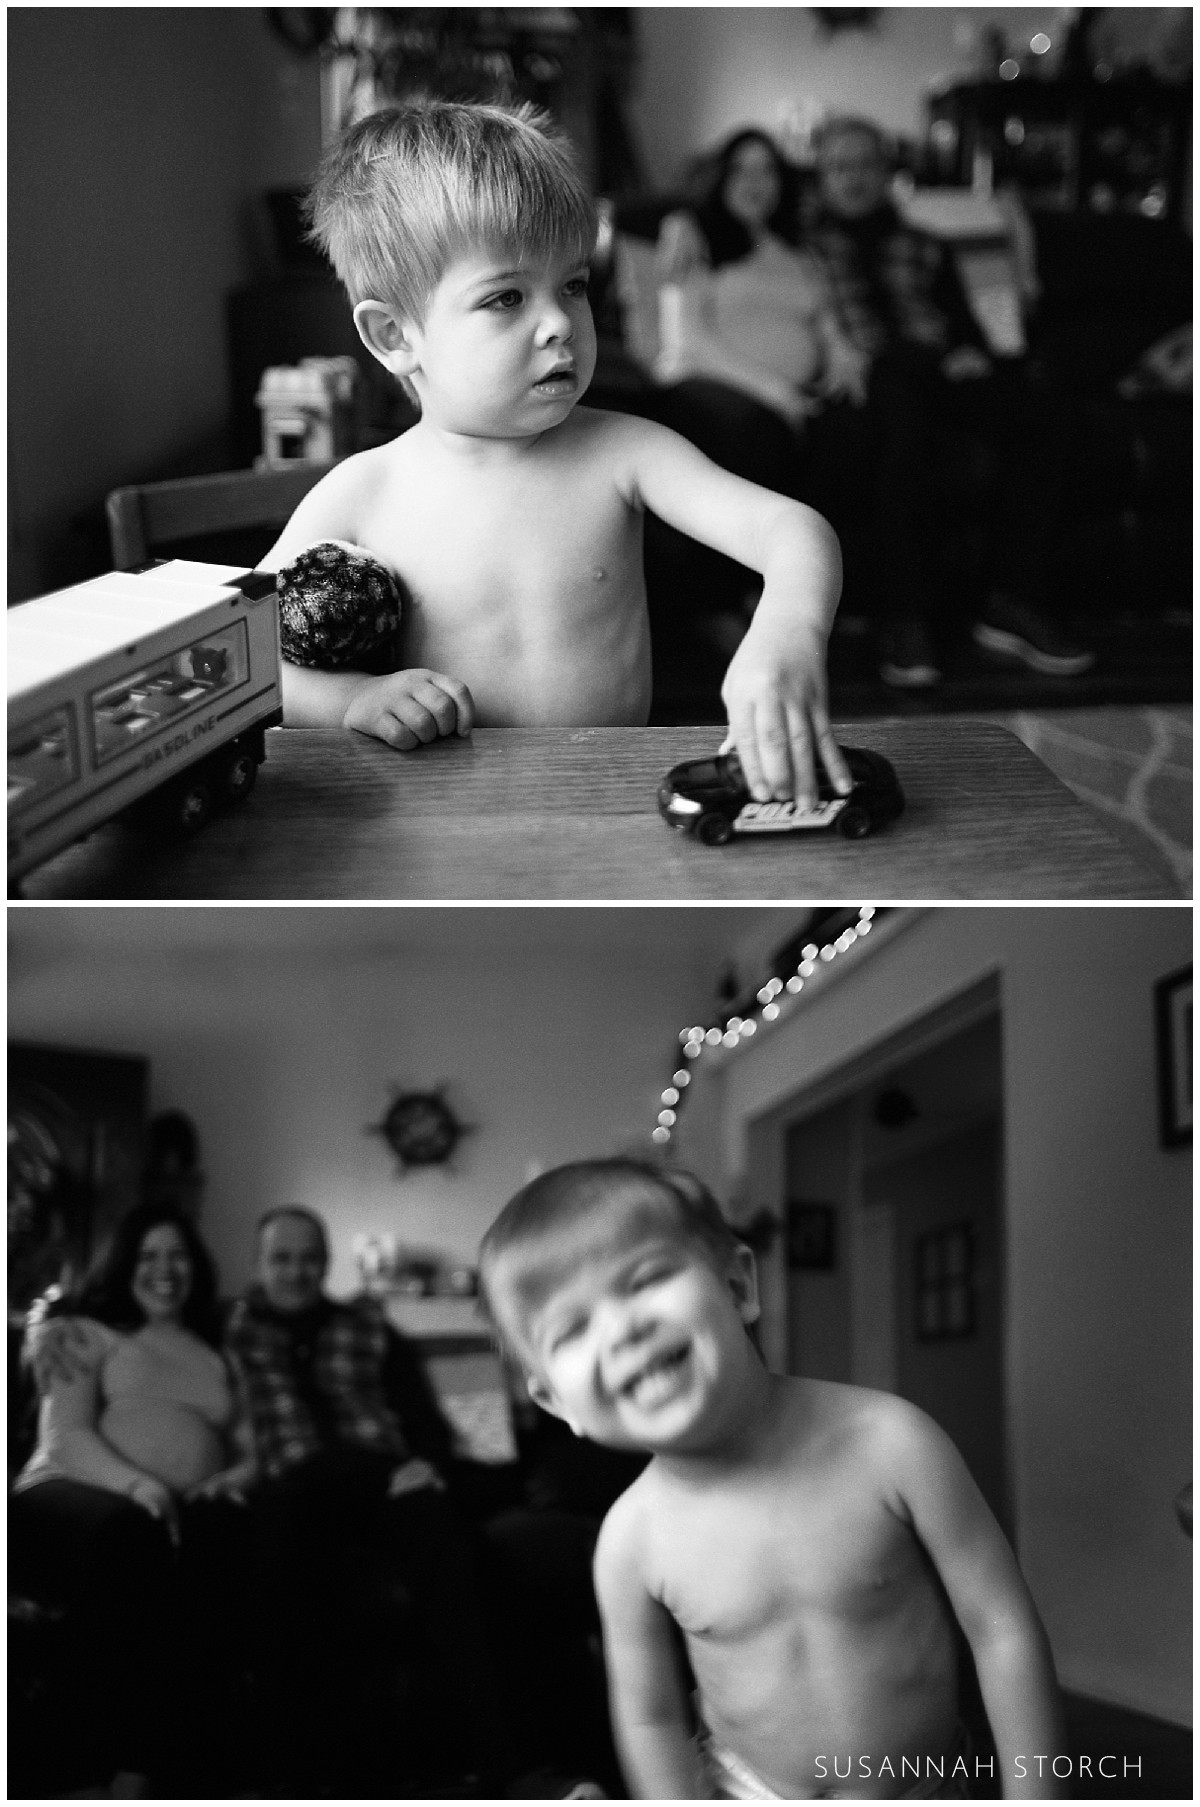 two black and white film photography images of a boy playing with toys